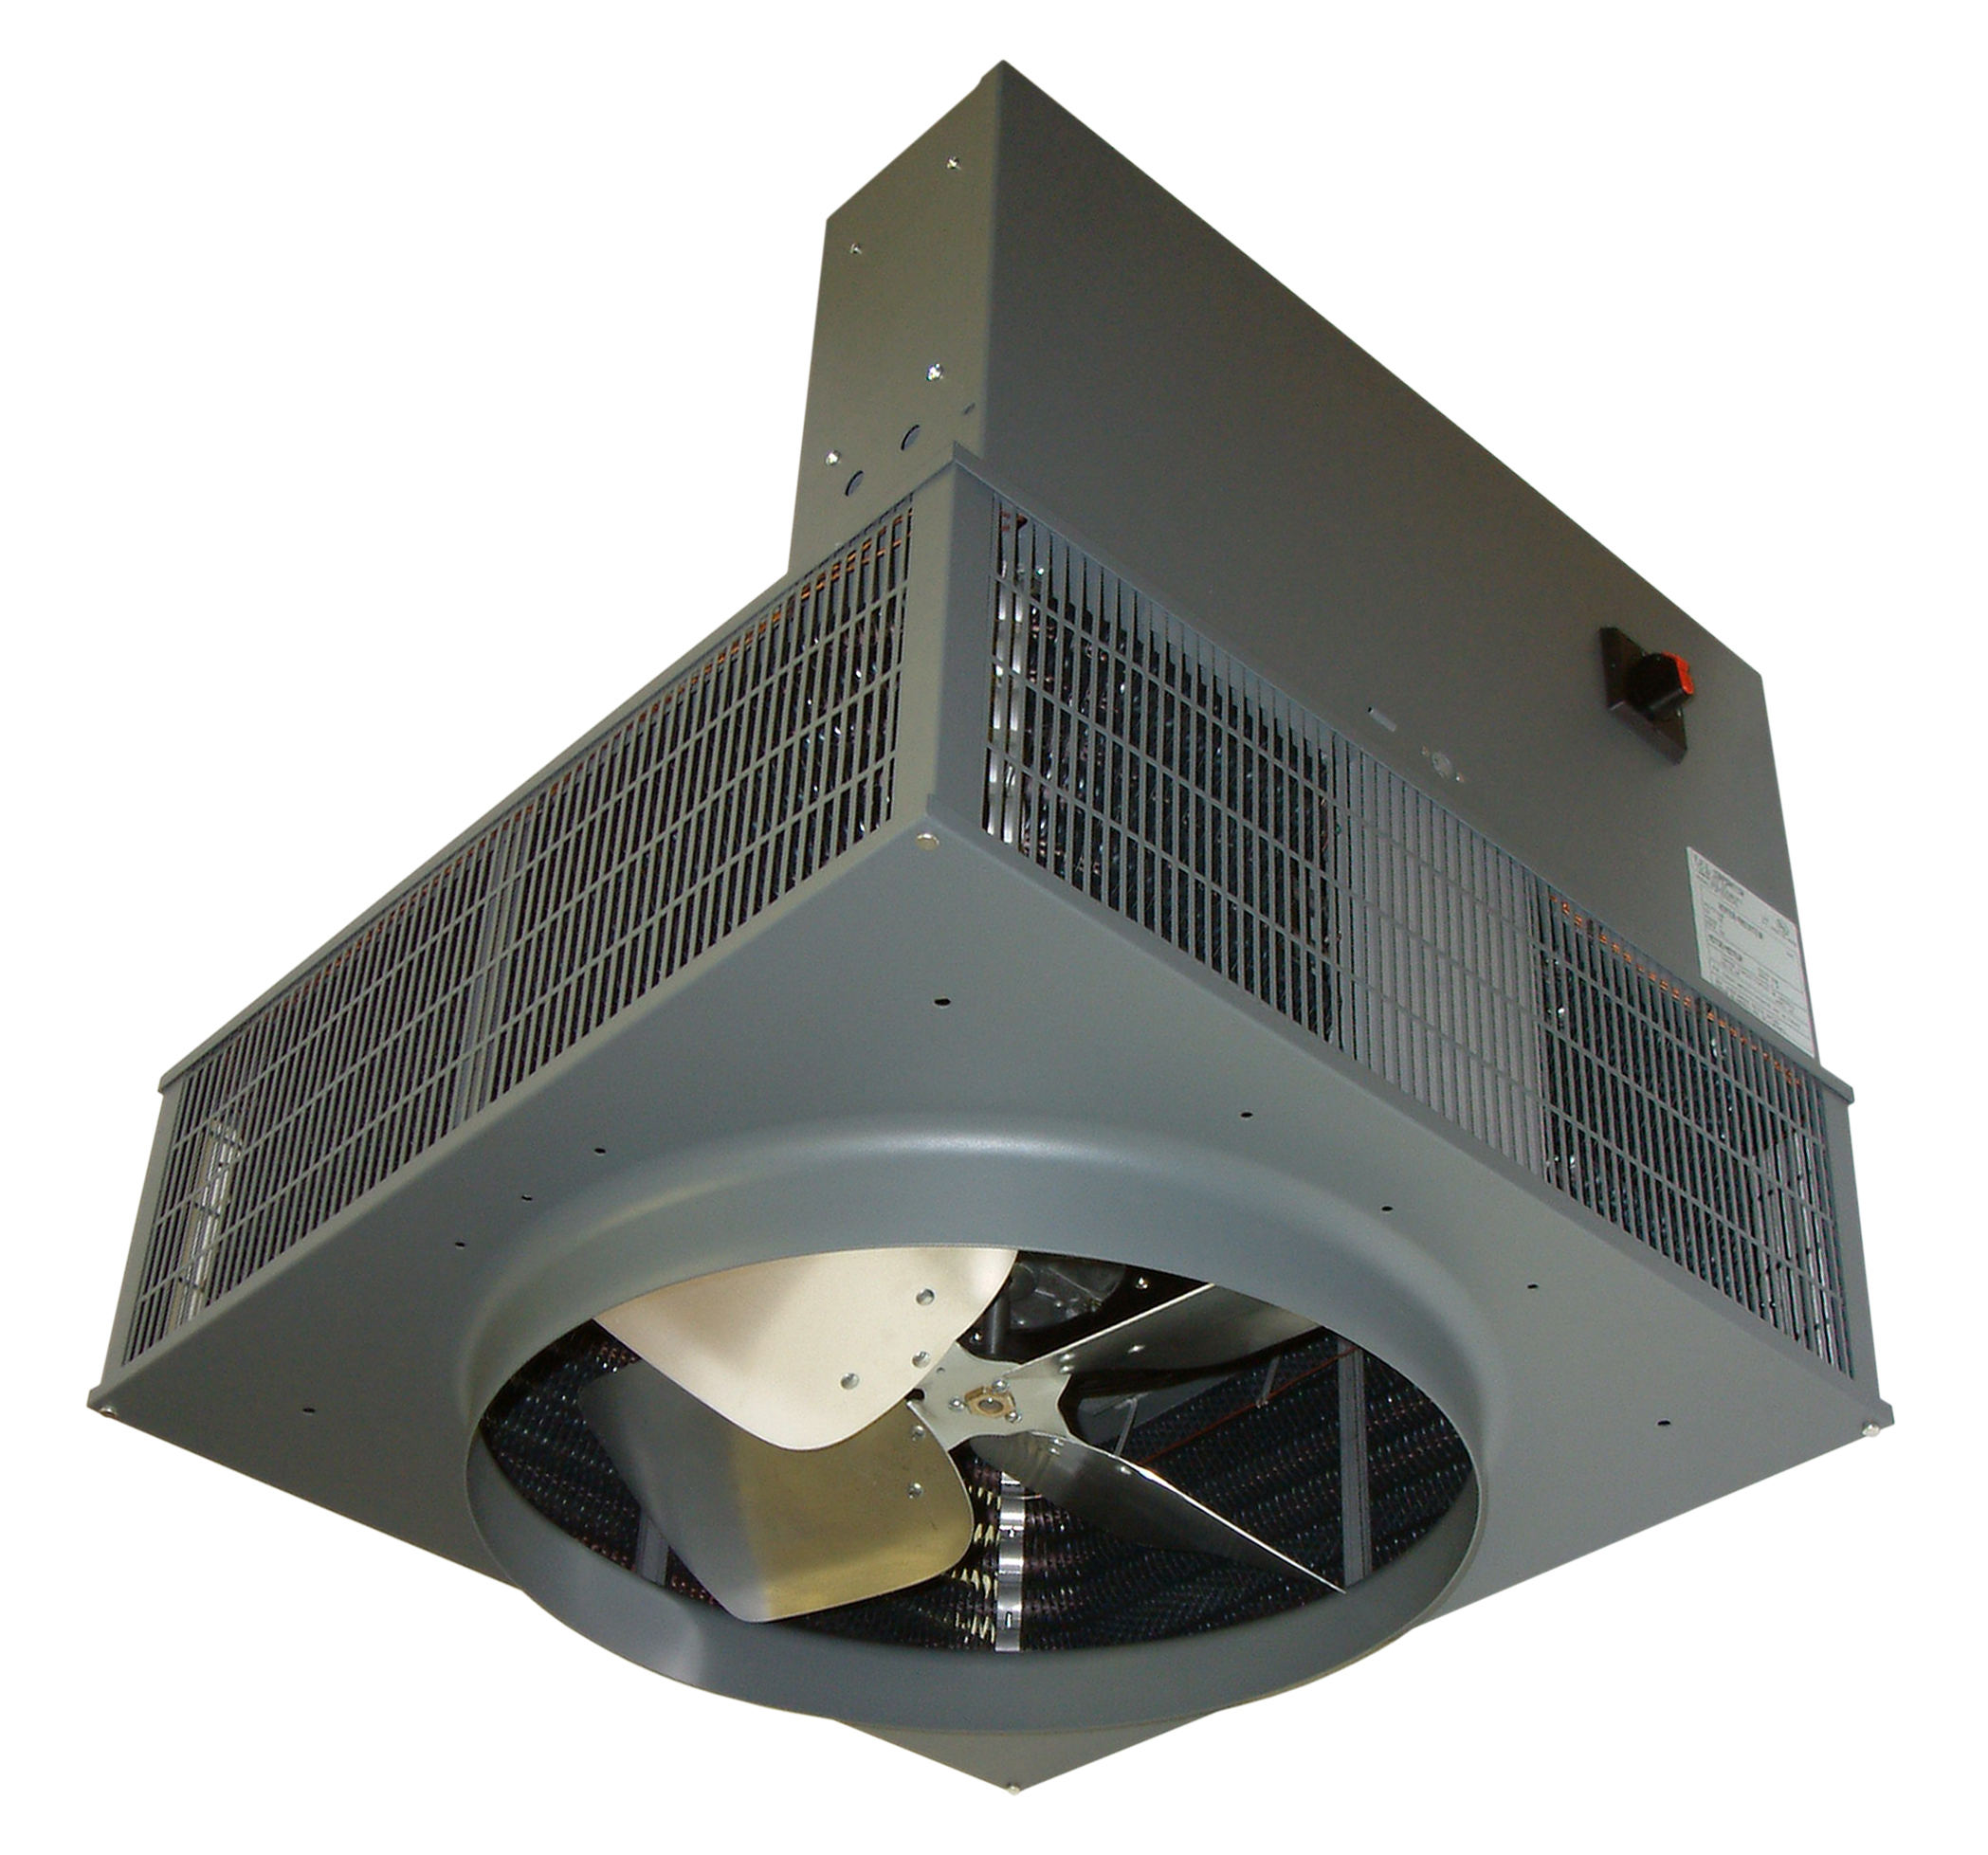 Downflow Unit Heater, 3 PH, 7.5 KW, 480 V, Bracket Mounting, Steel Housing Material, Dimensions- 20-1/2 Width X 15 Height X 20-1/2 Depth IN, BTU Rating- 25598, 93 AMP, Epoxy Powder Coated Finish